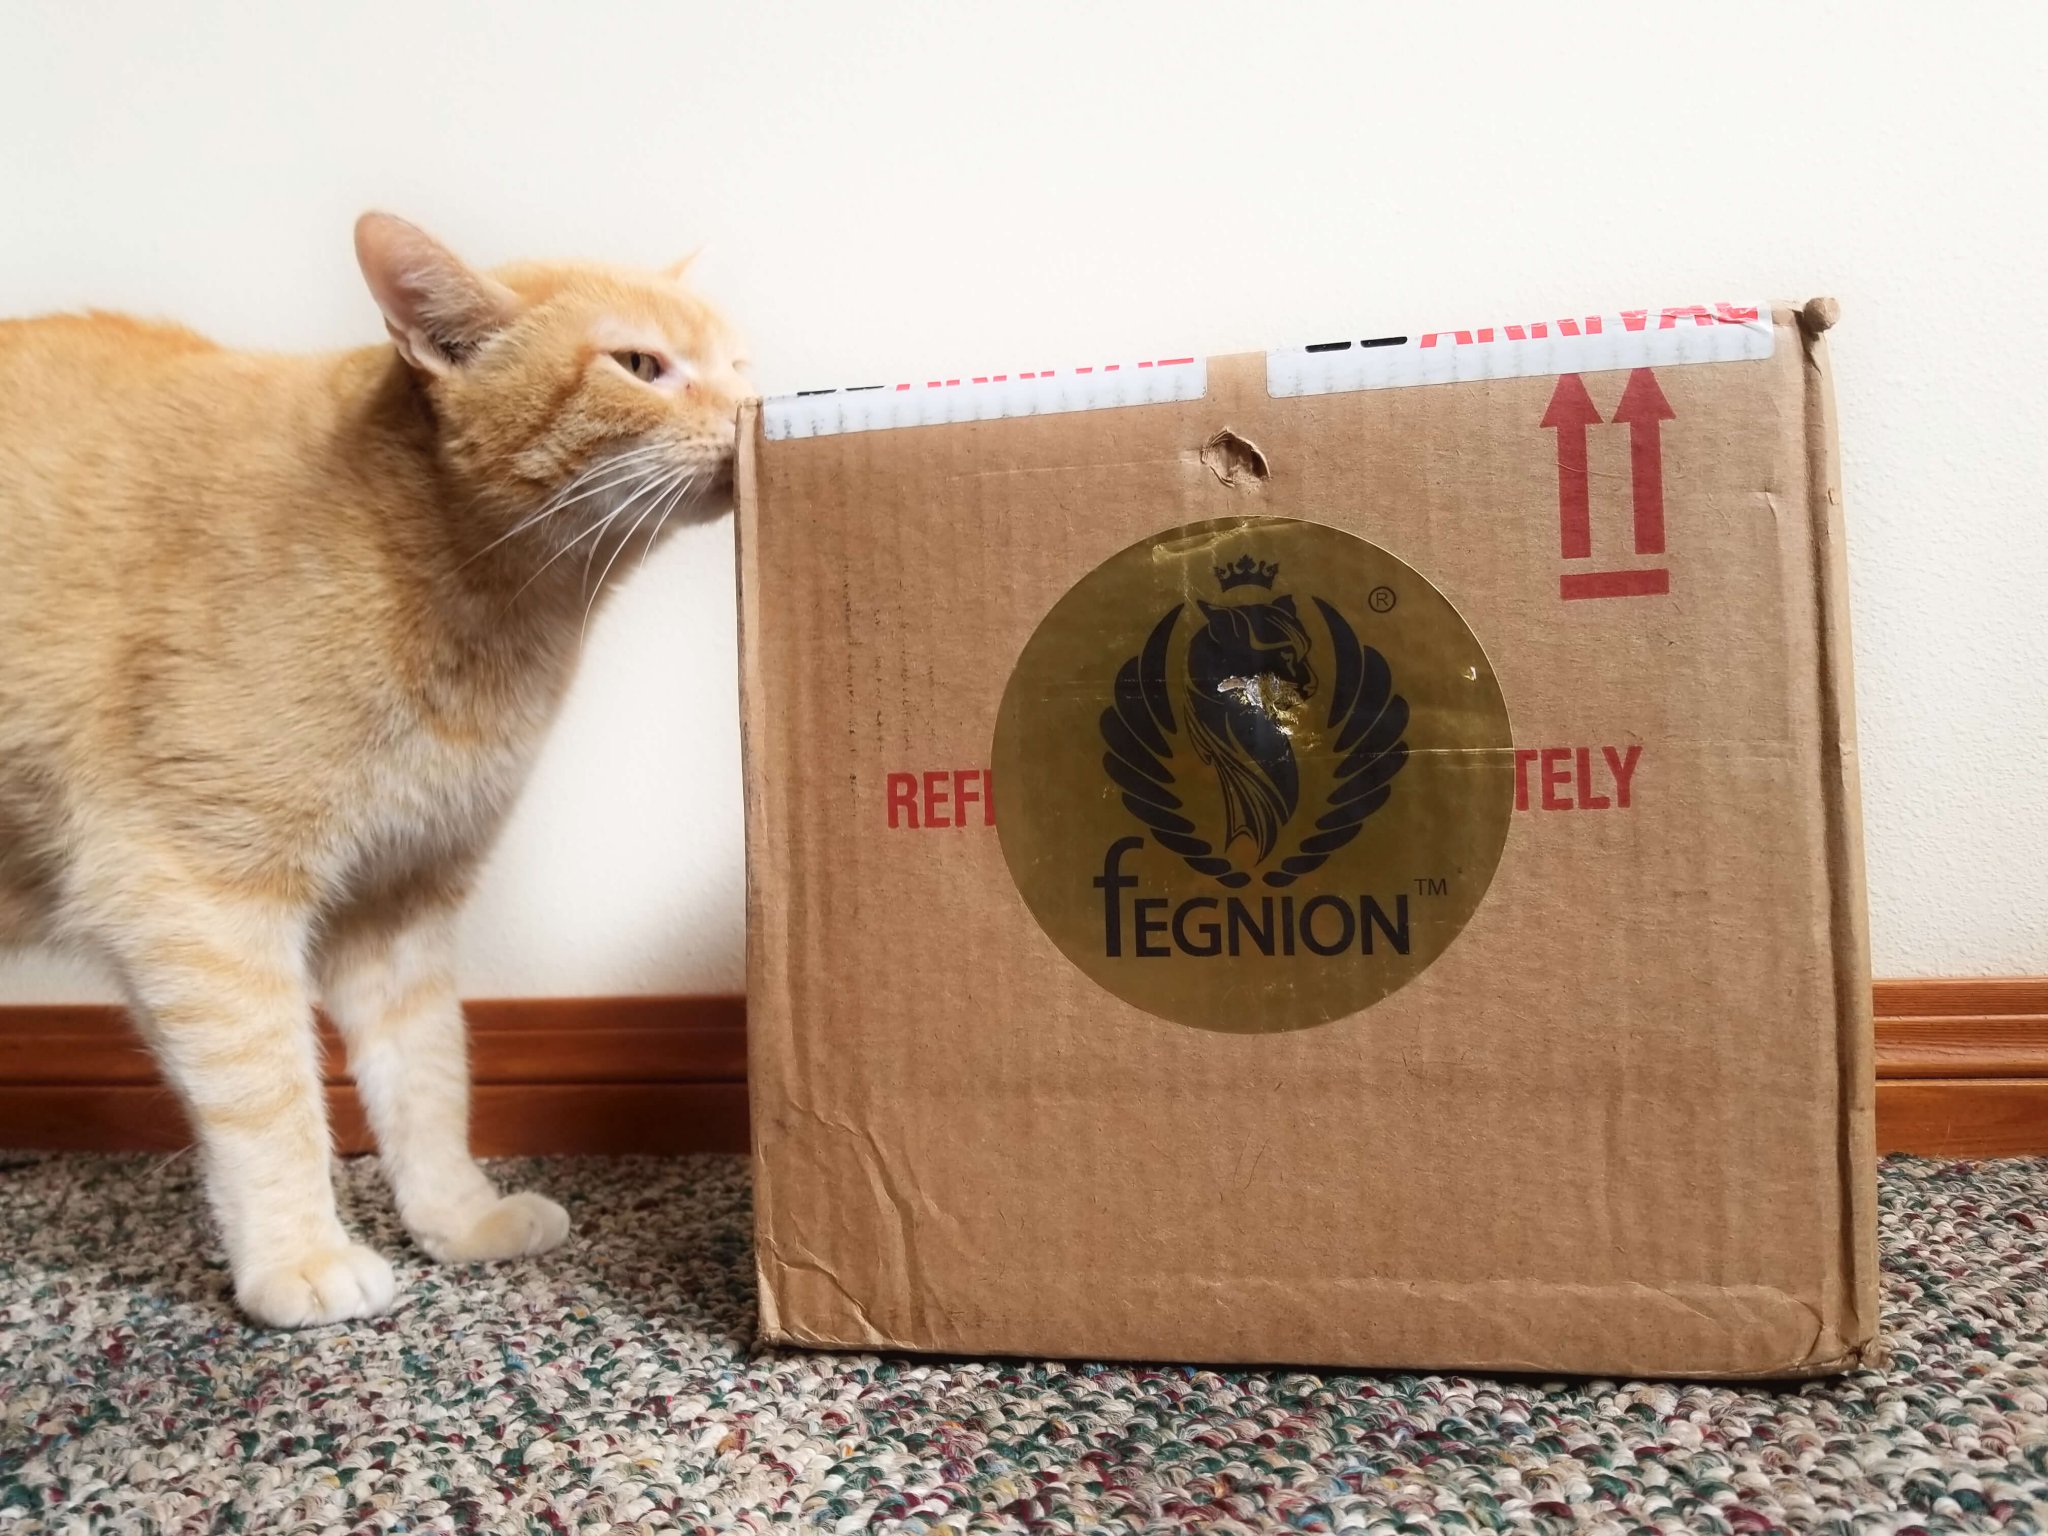 Wessie Encounters the Fegnion Box